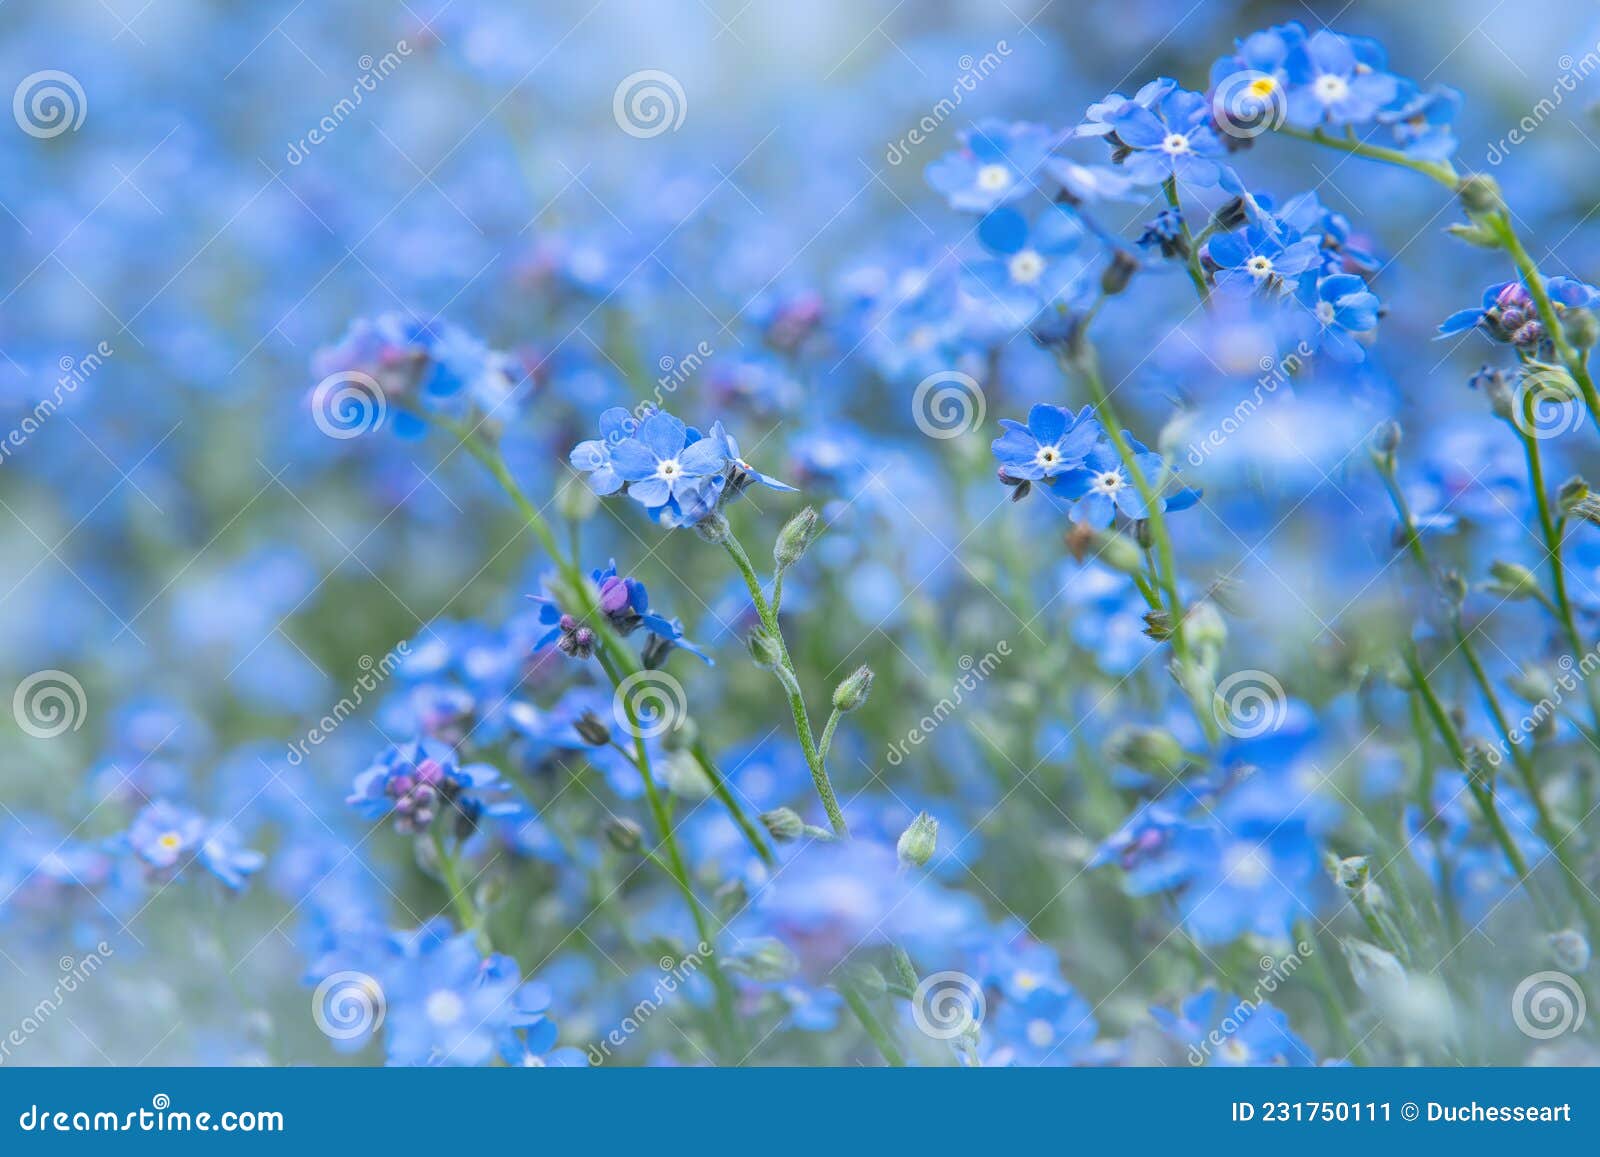 spring nature background with blue forget-me-not flowers. myosotis sylvatica, arvensis or scorpion grasses